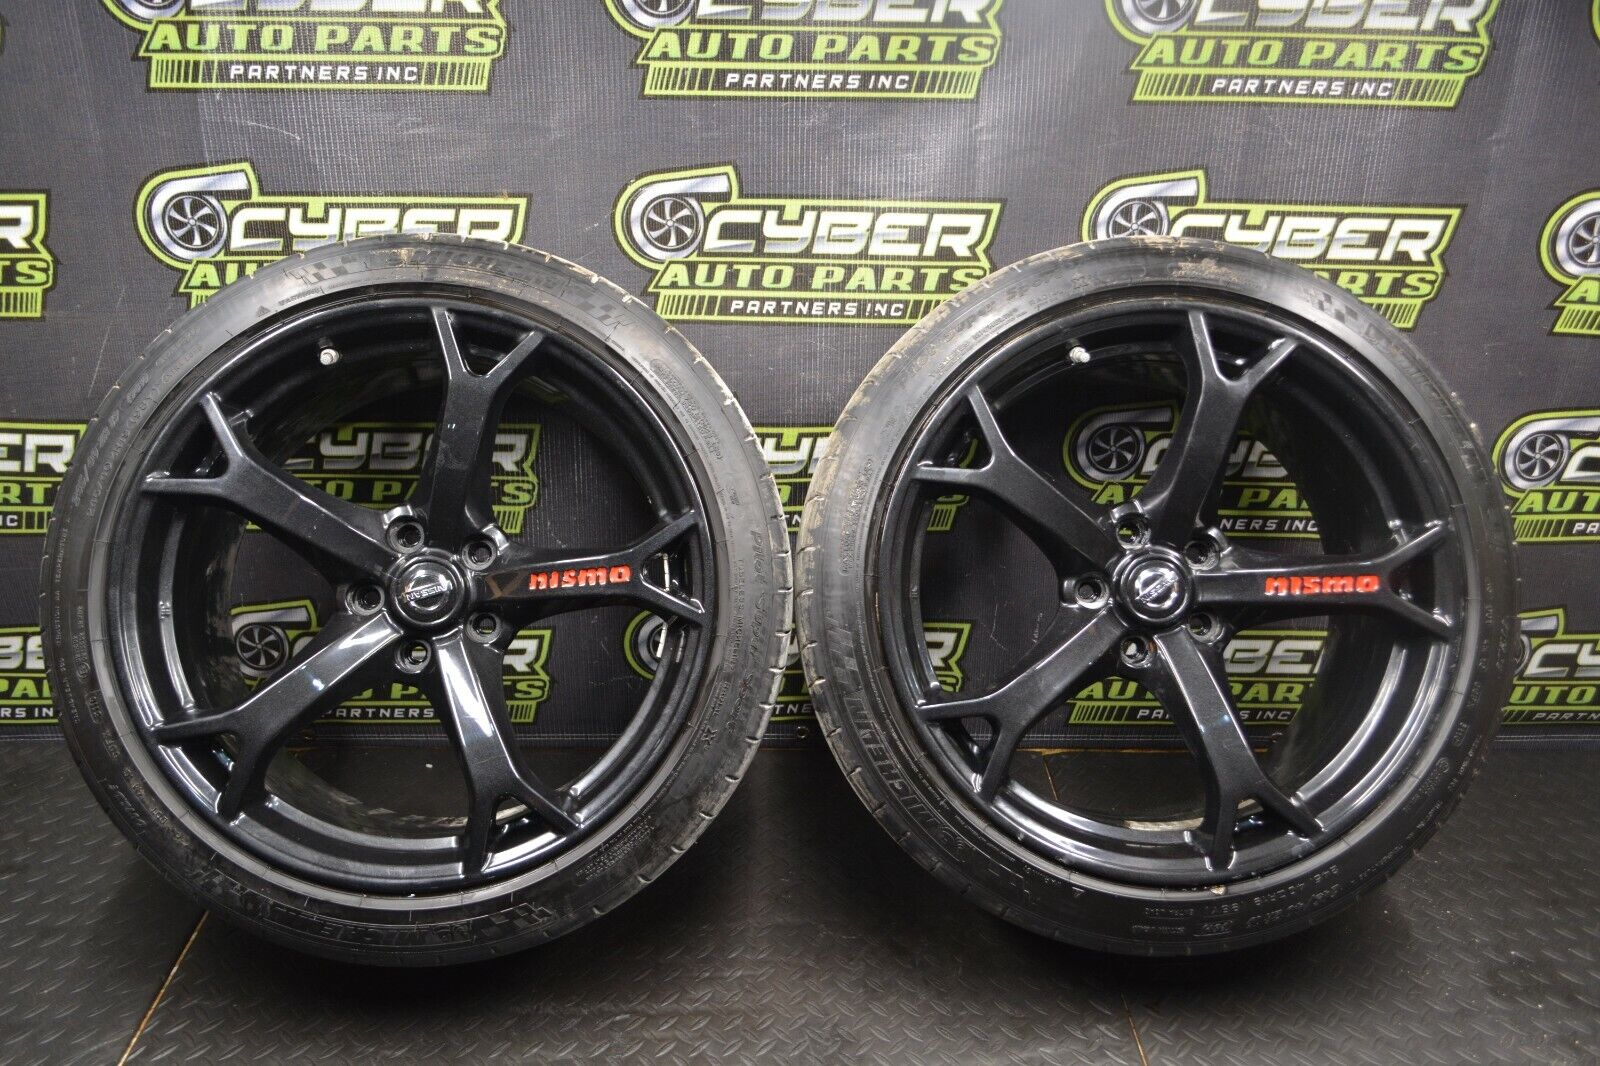 2012 370Z NISMO WHEELS RAYS FORGED 19X9.5 FRONT PAIR MICHELIN SUPER SPORT 245/40